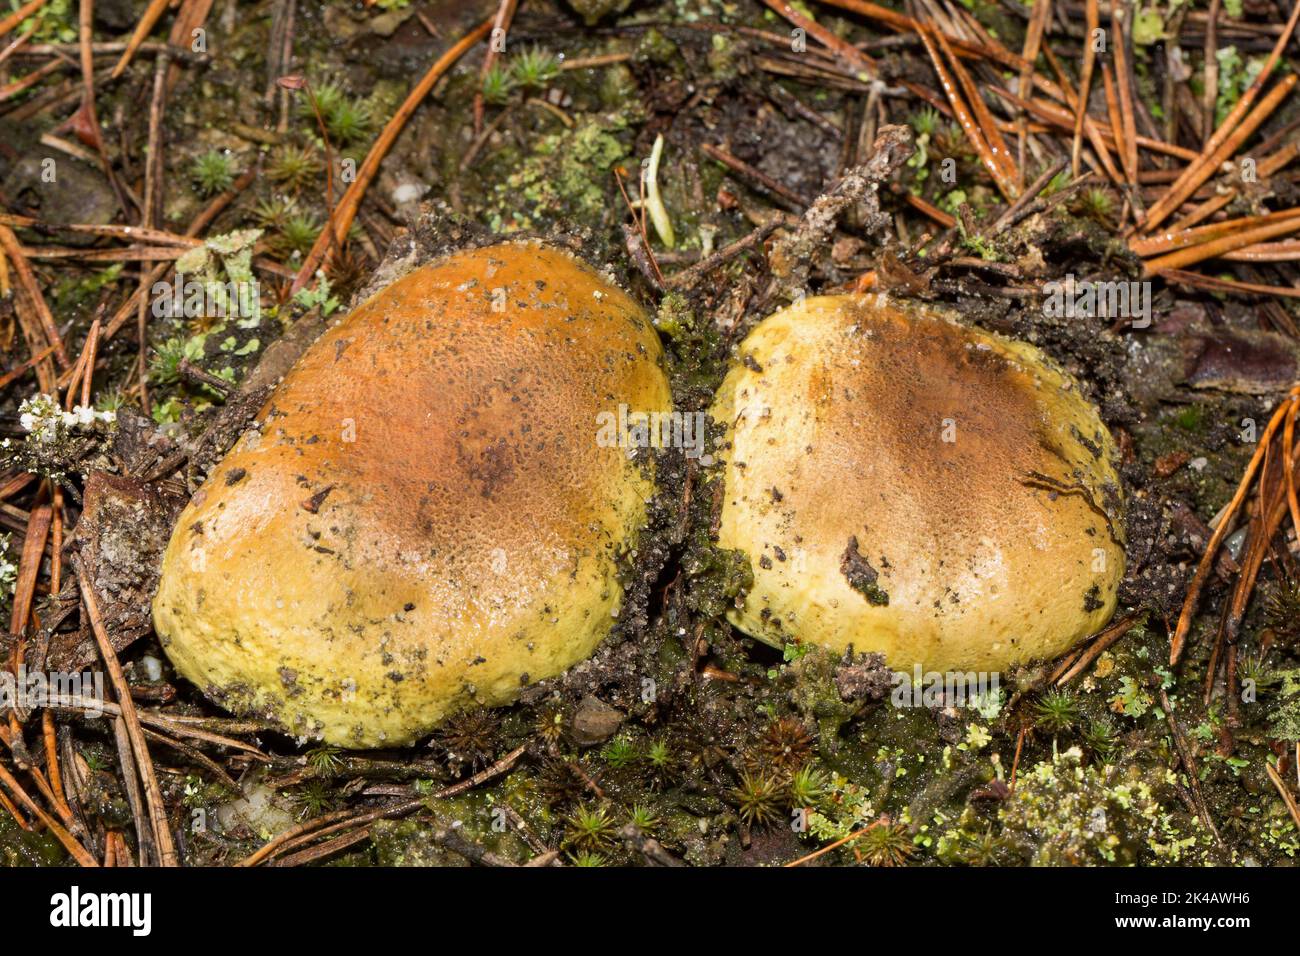 Greenling fruiting body two brown-greenish hats next to each other Stock Photo